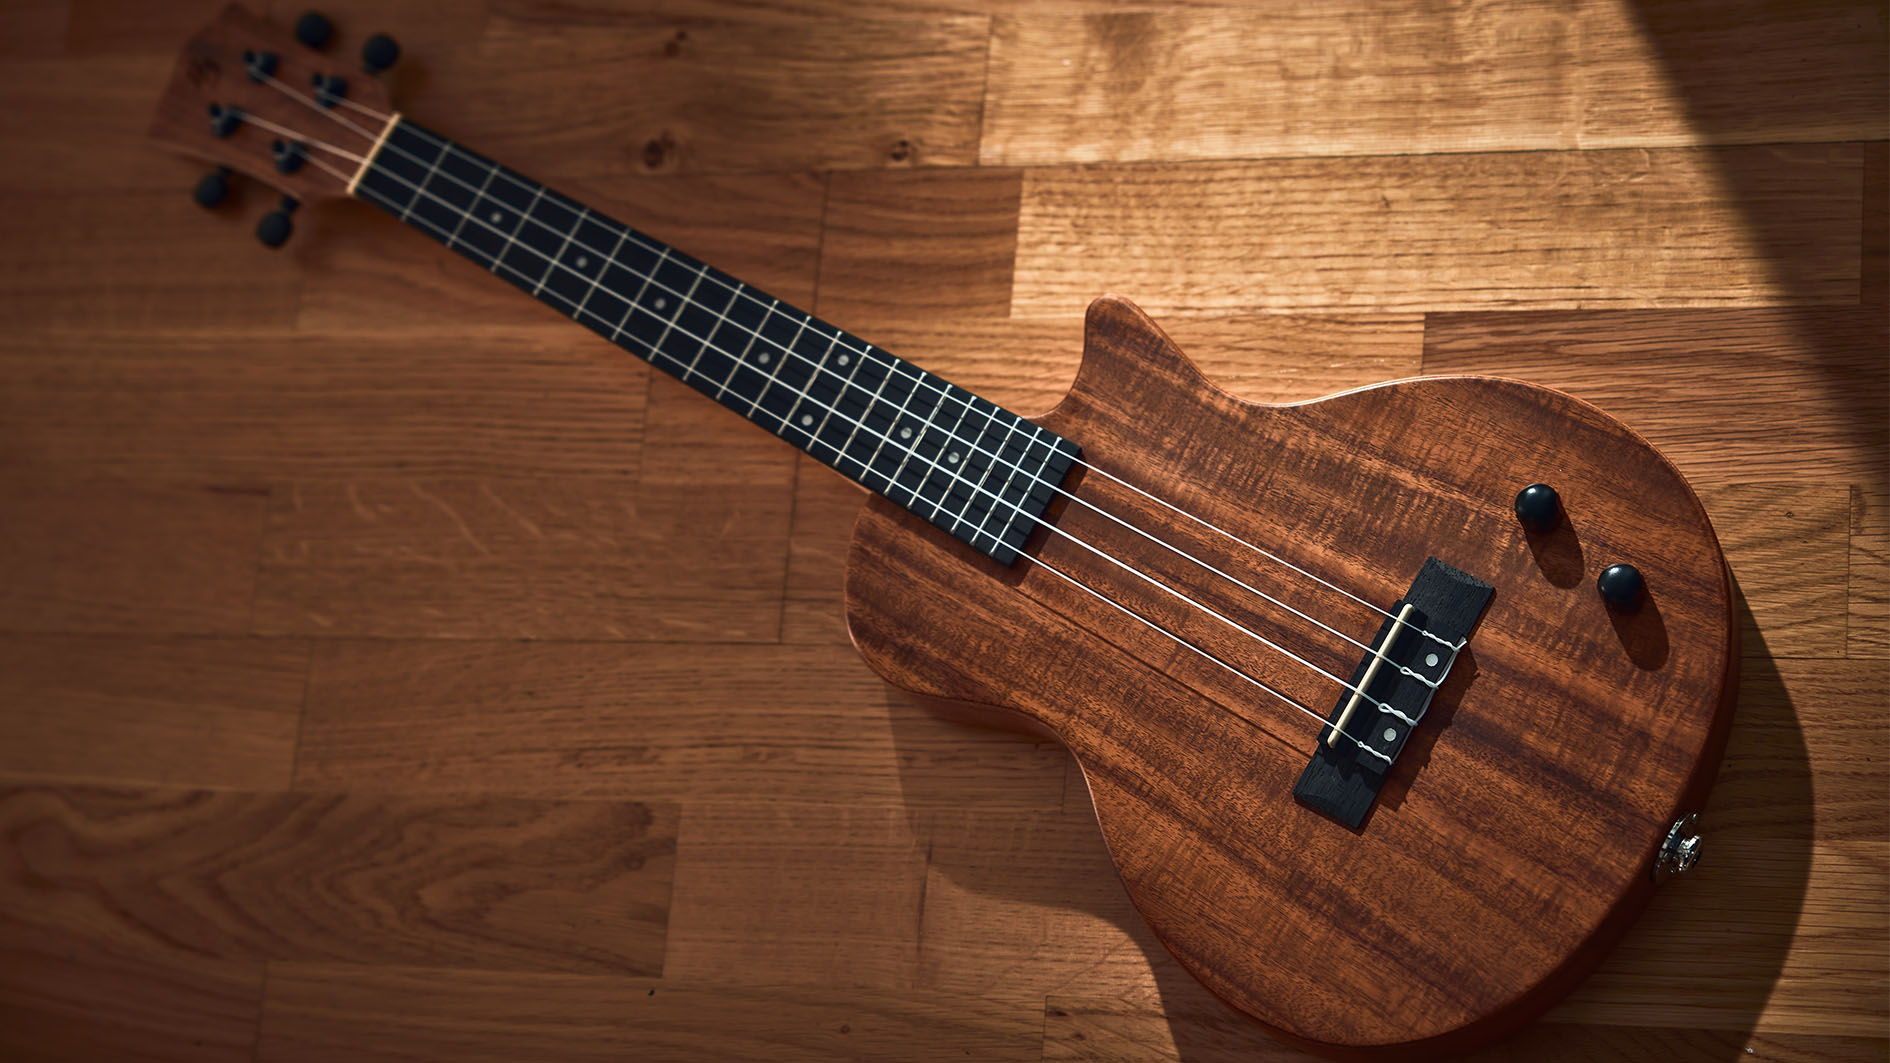 Harley expands its ukulele offering with a solidbody mini-strummer three U-Bass models | Guitar World